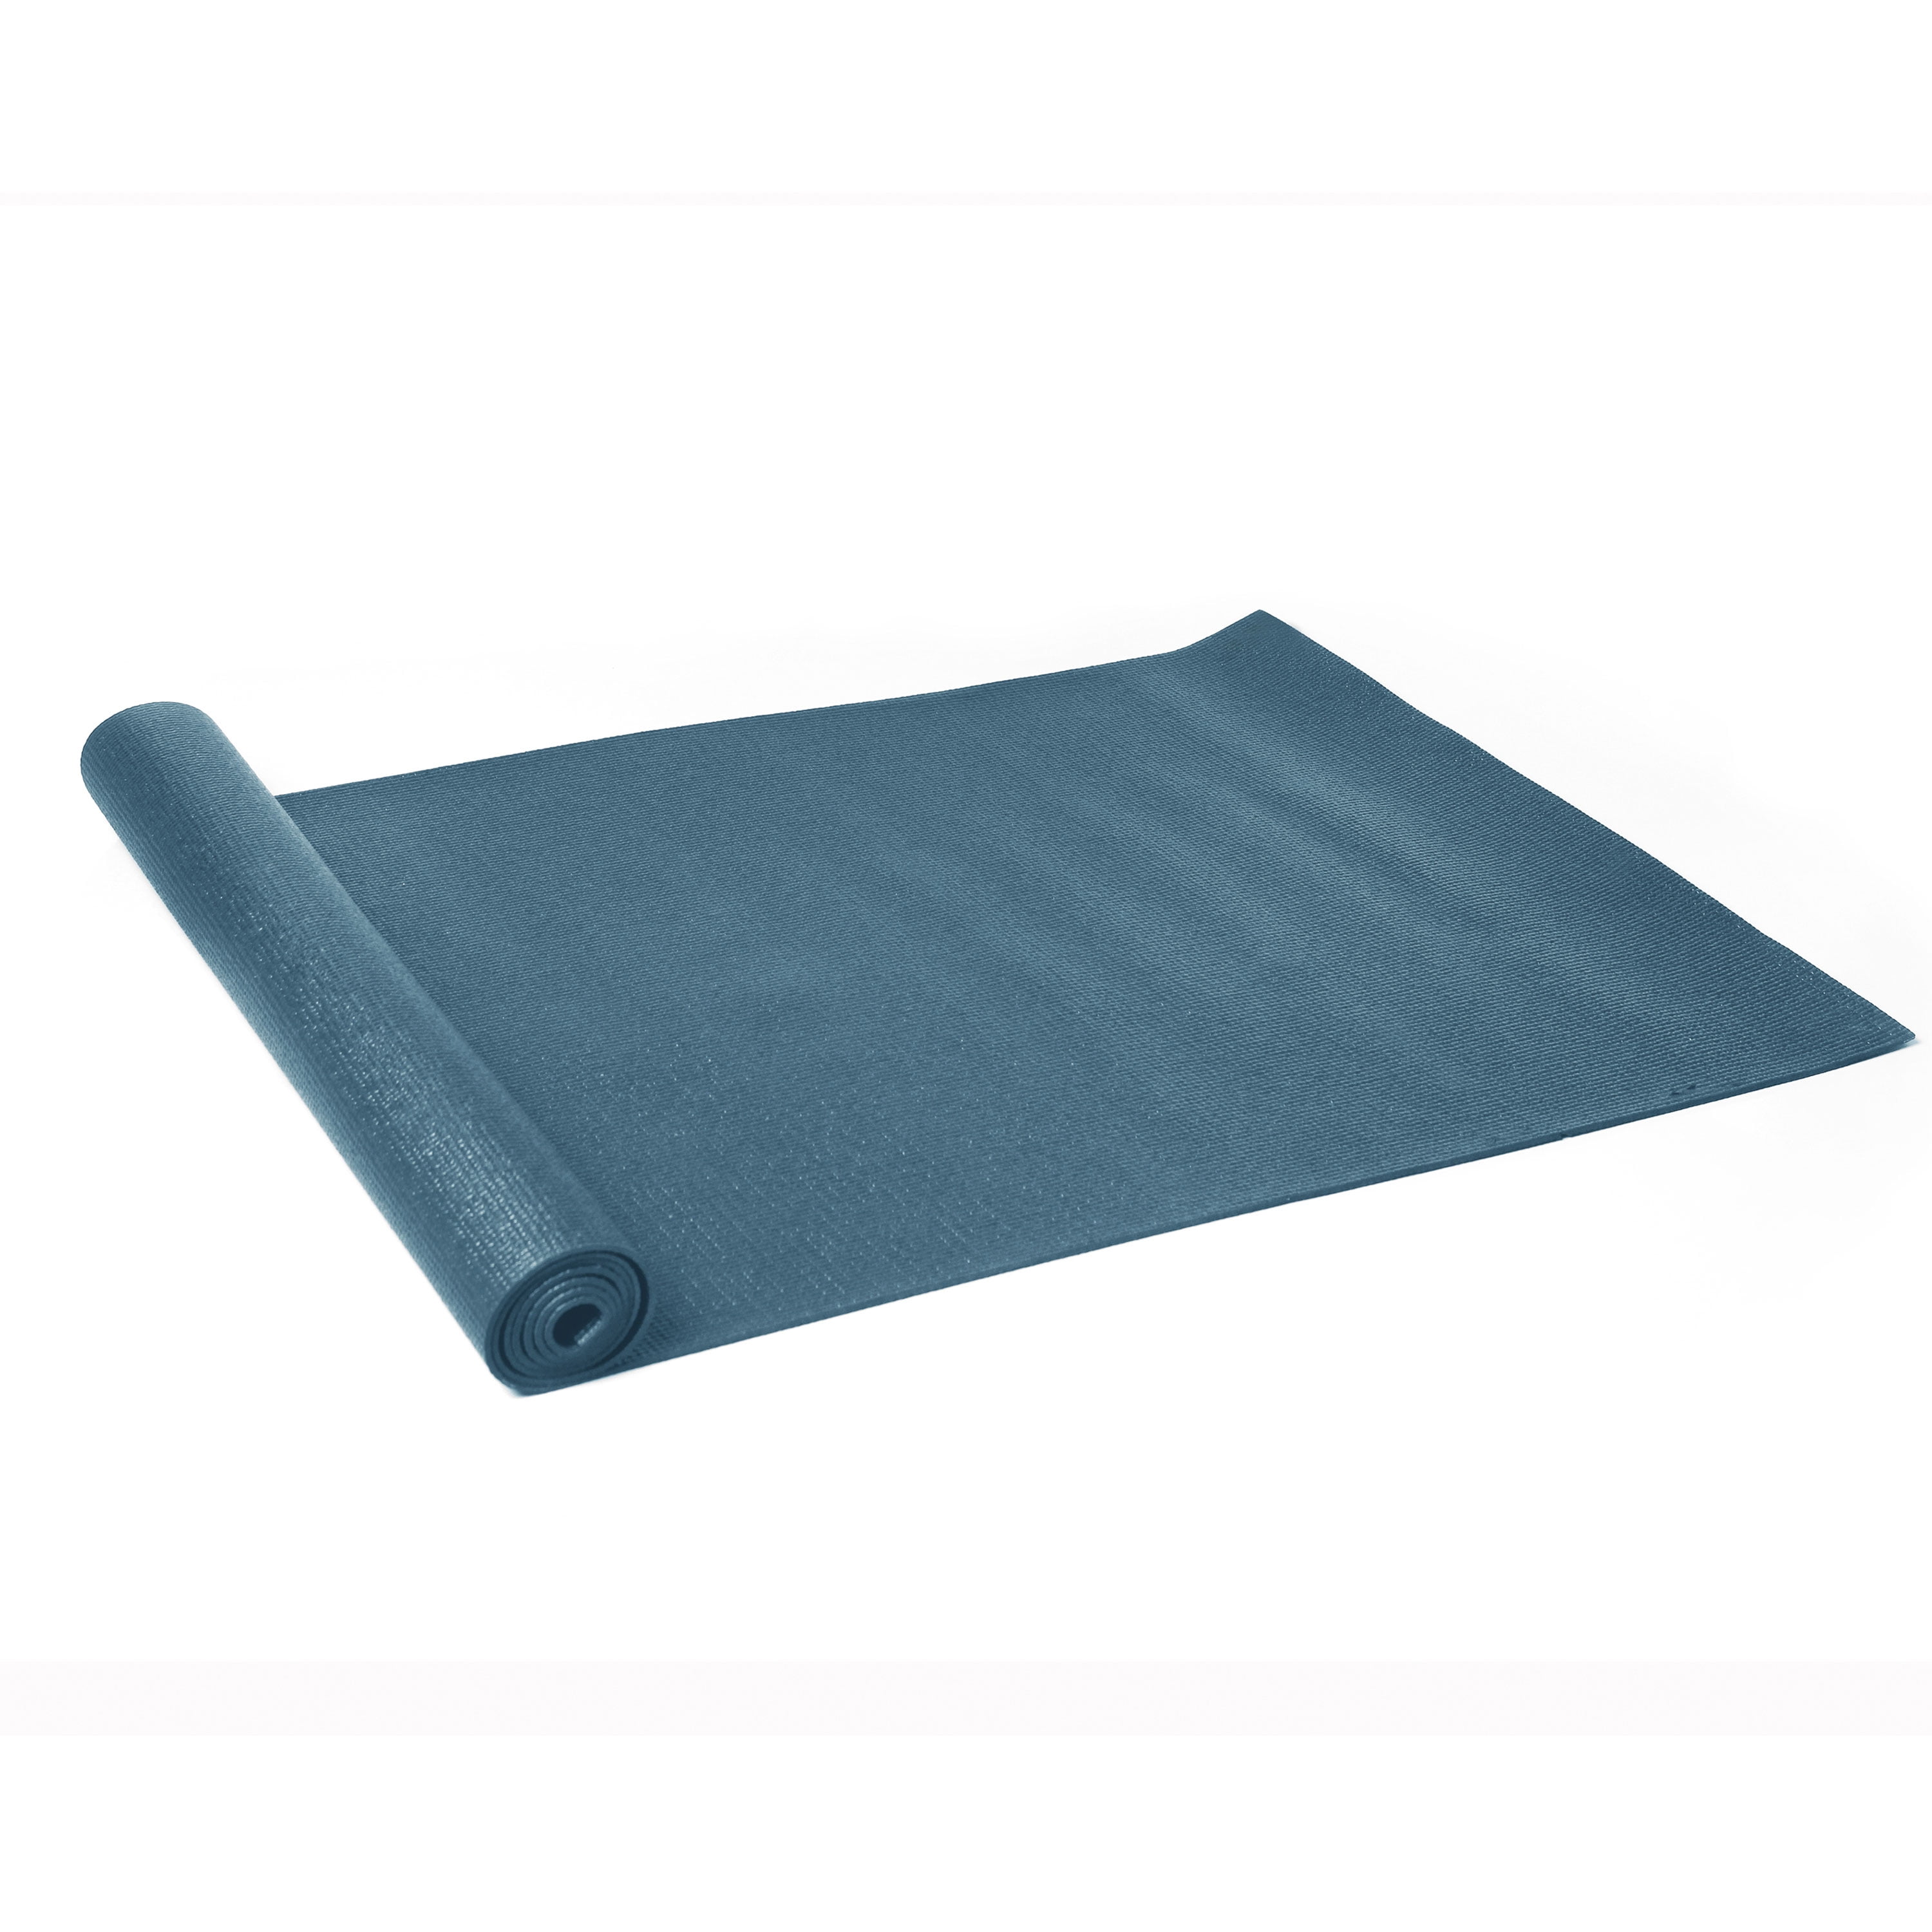 3 Ways to stop slipping on a yoga mat - simple solutions to stop sliding